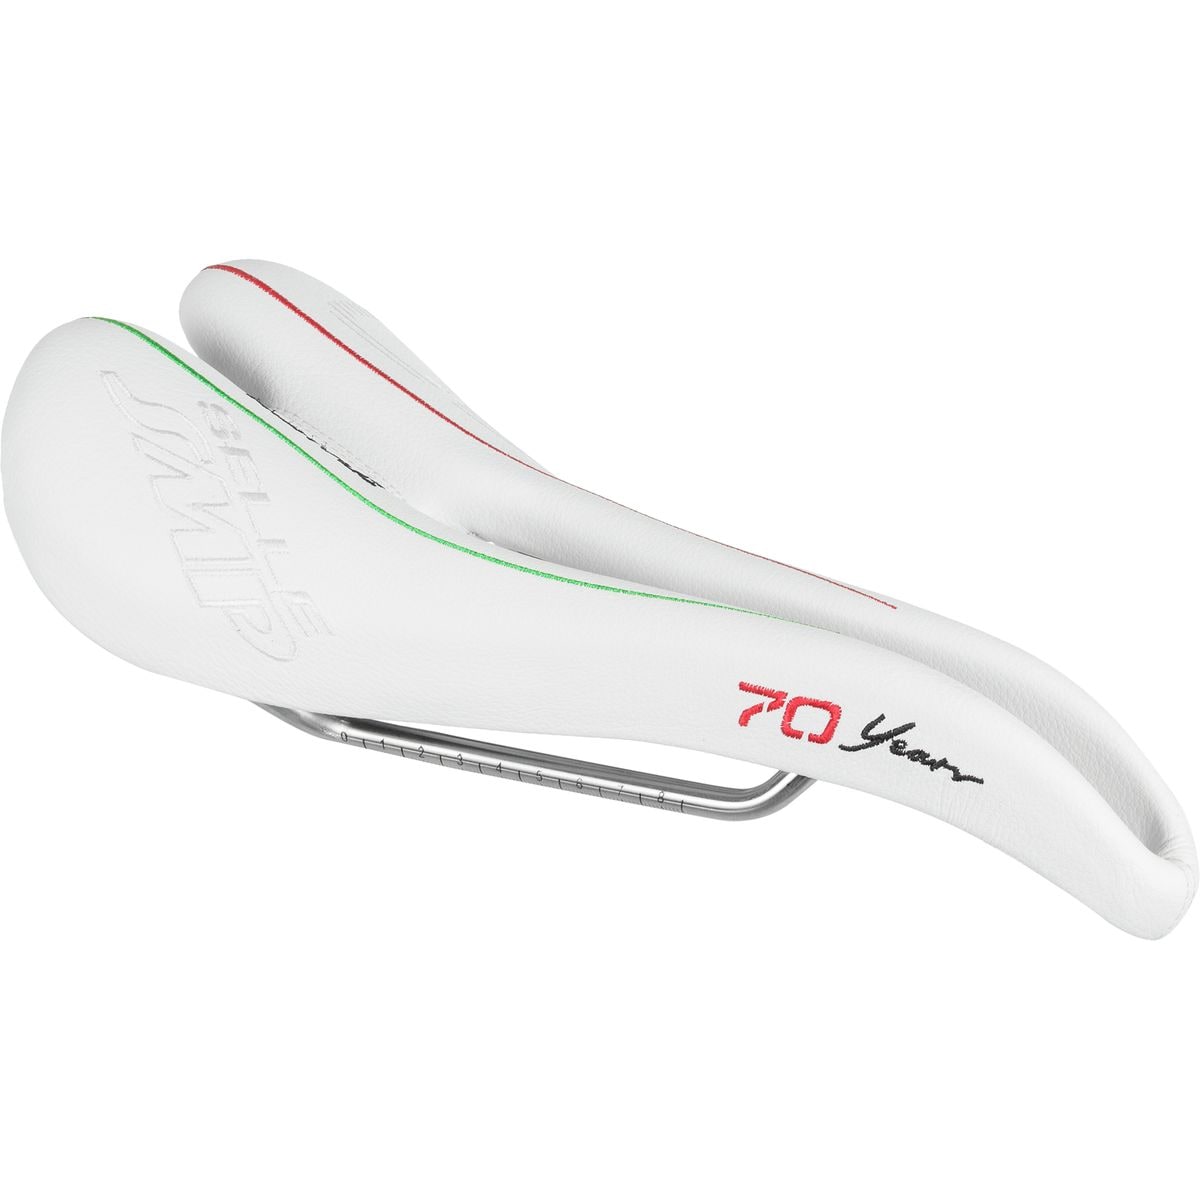 Selle SMP Drakon 70th Anniversary Limited Edition Saddle